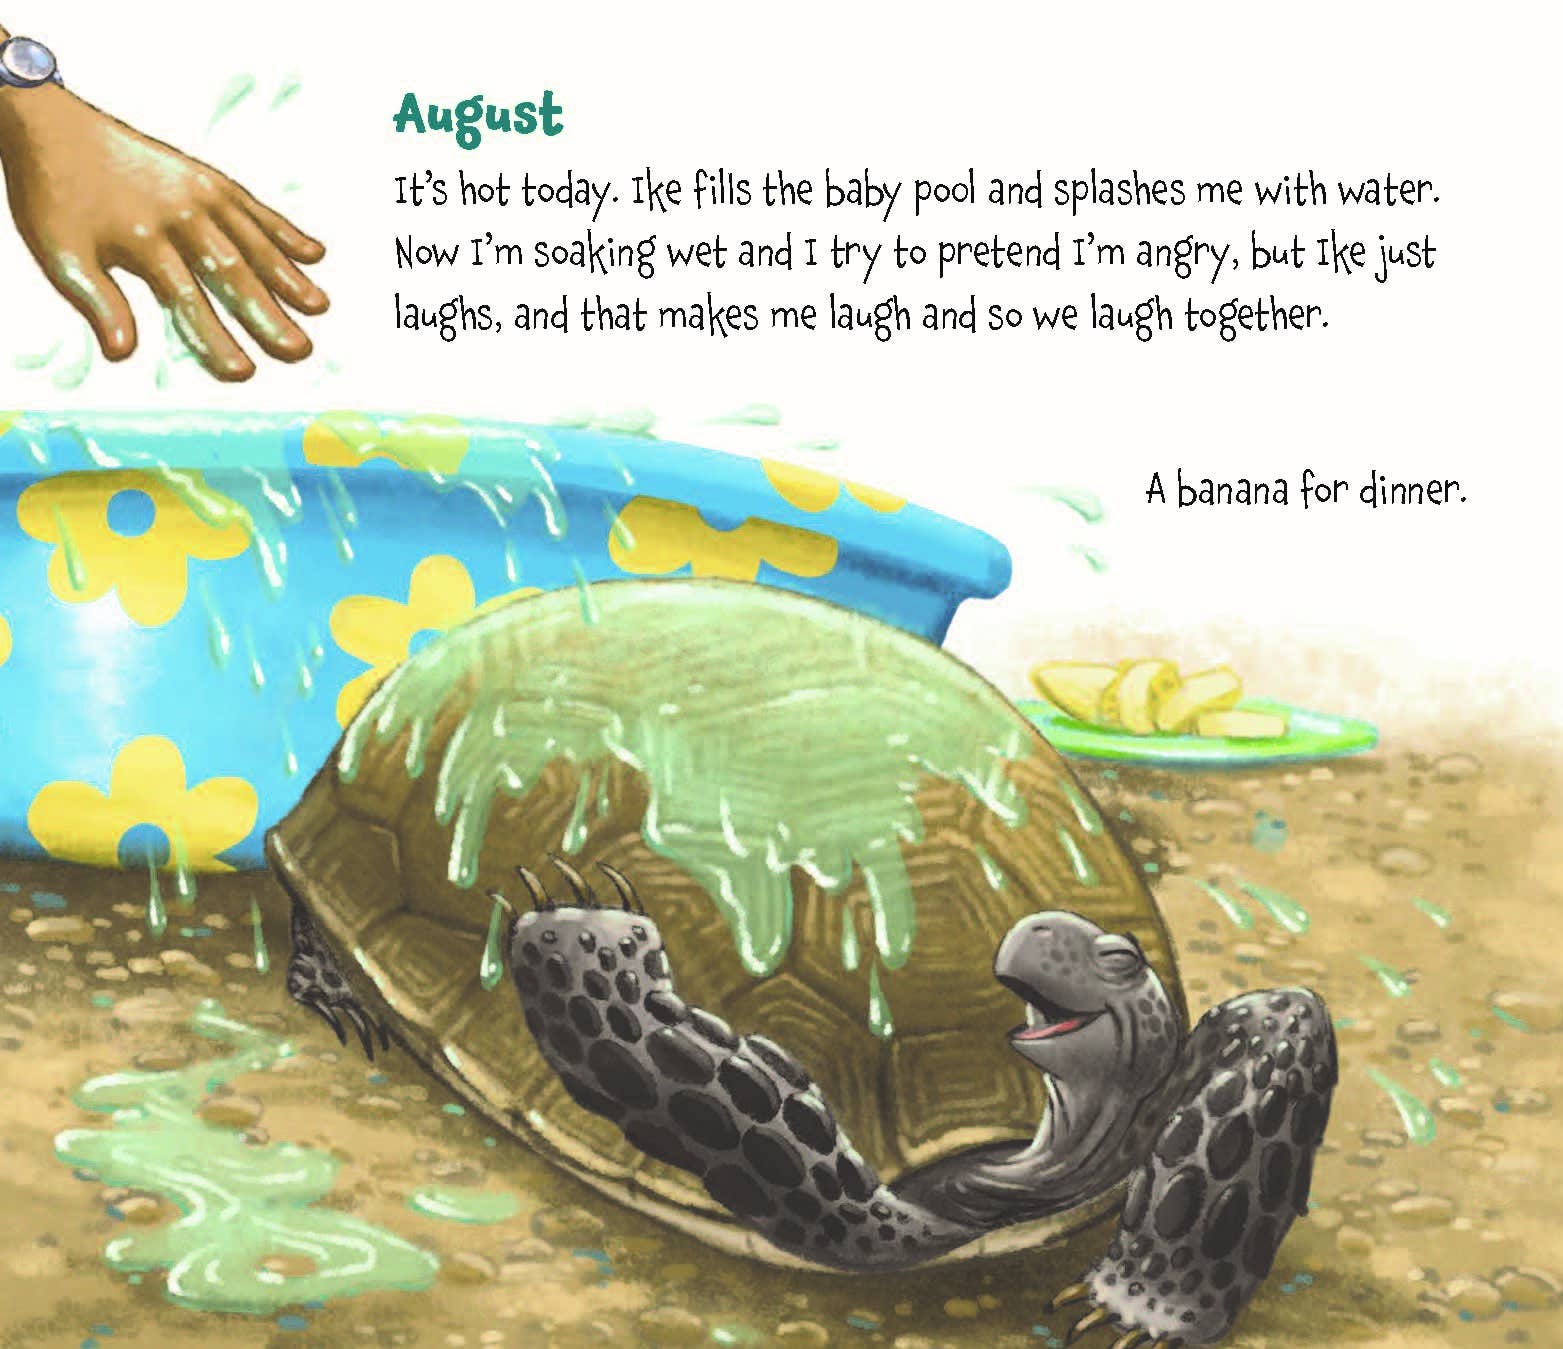 Memoirs of a Tortoise, a picture book